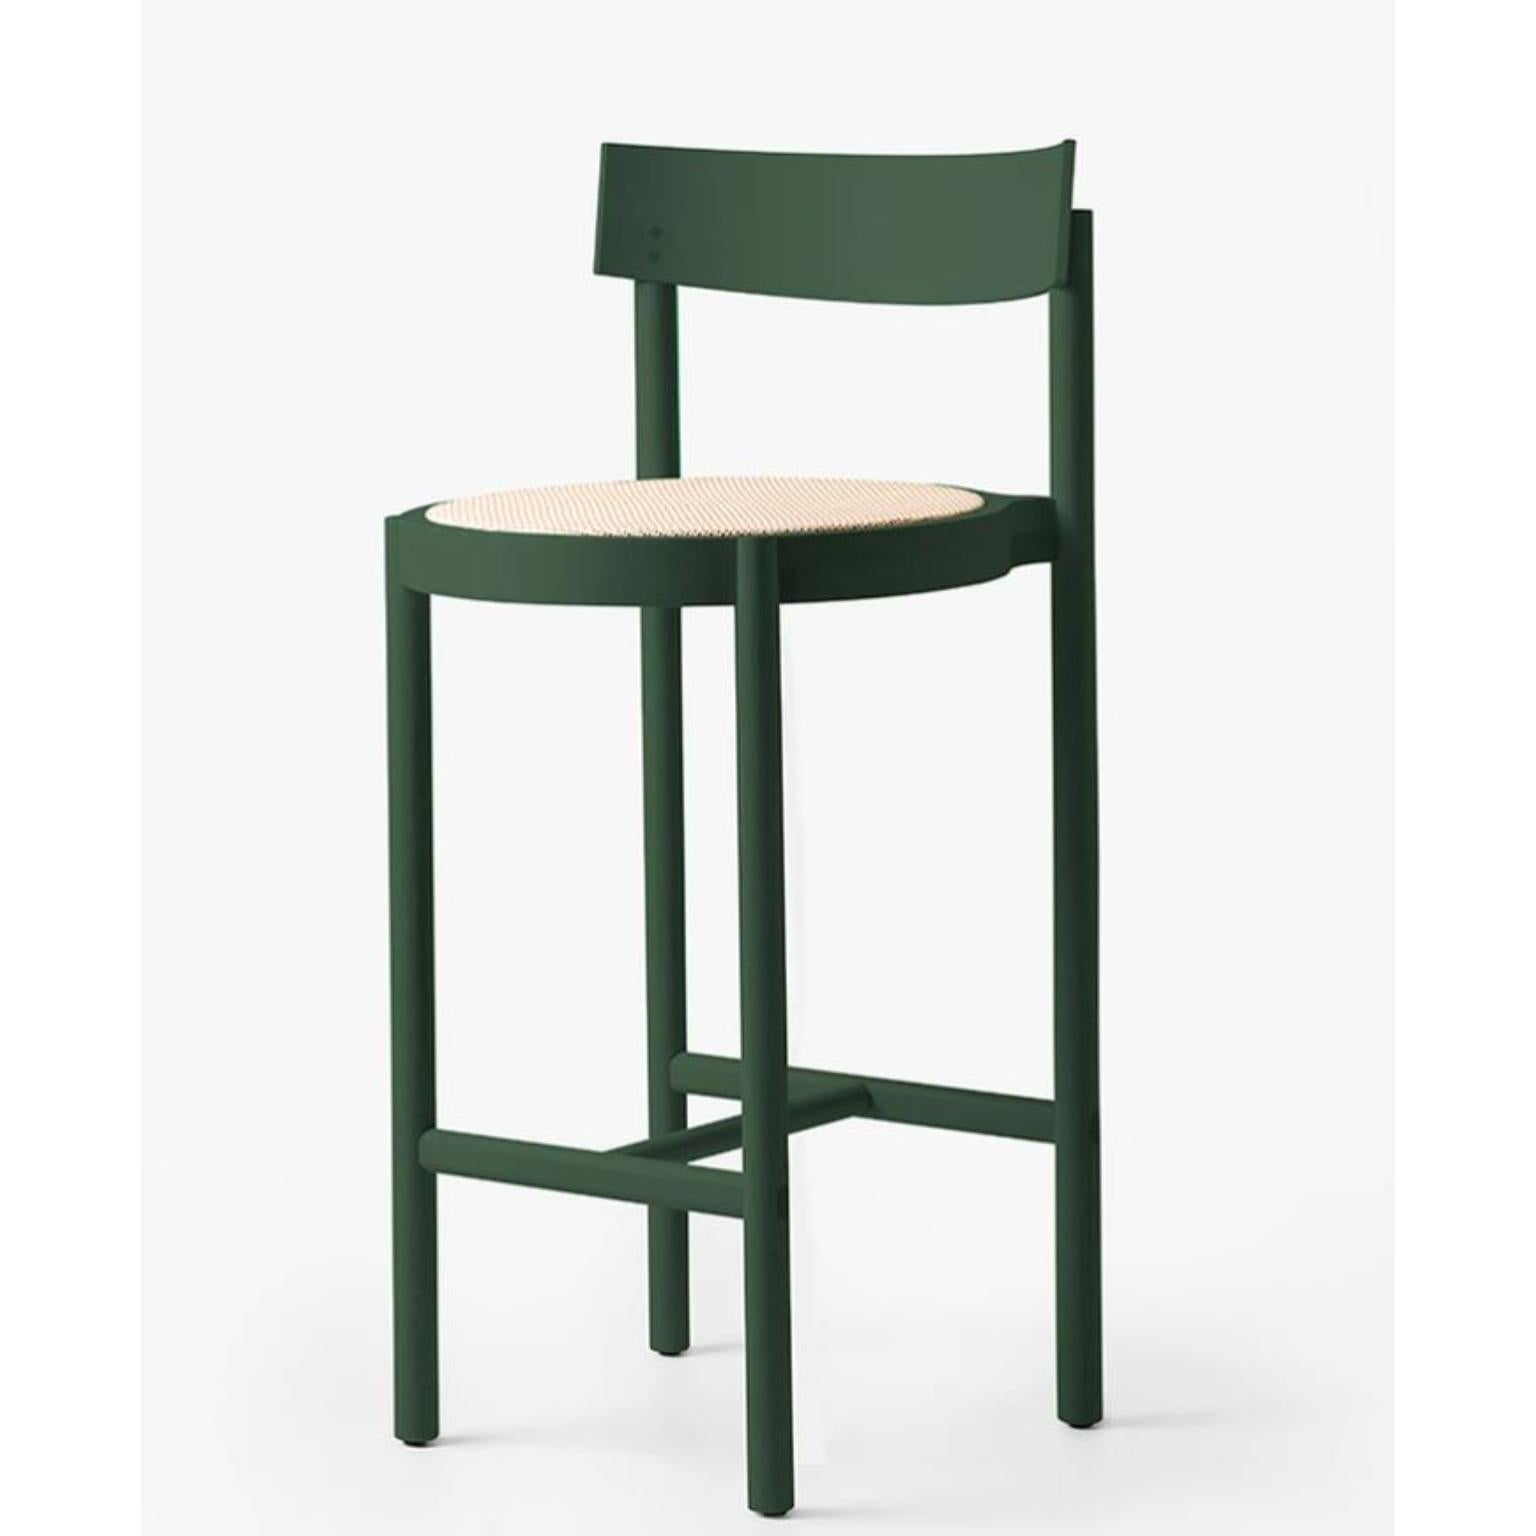 Green Gravatá Bar Stool by Wentz
Dimensions: D 52 x W 47 x H 100 cm
Materials: Tauari Wood, Cane/Upholstery.
Weight: 4,7kg / 10,4 lbs

The Gravatá series synthesizes our vision regarding the functional and visual simplicity of furniture. Through